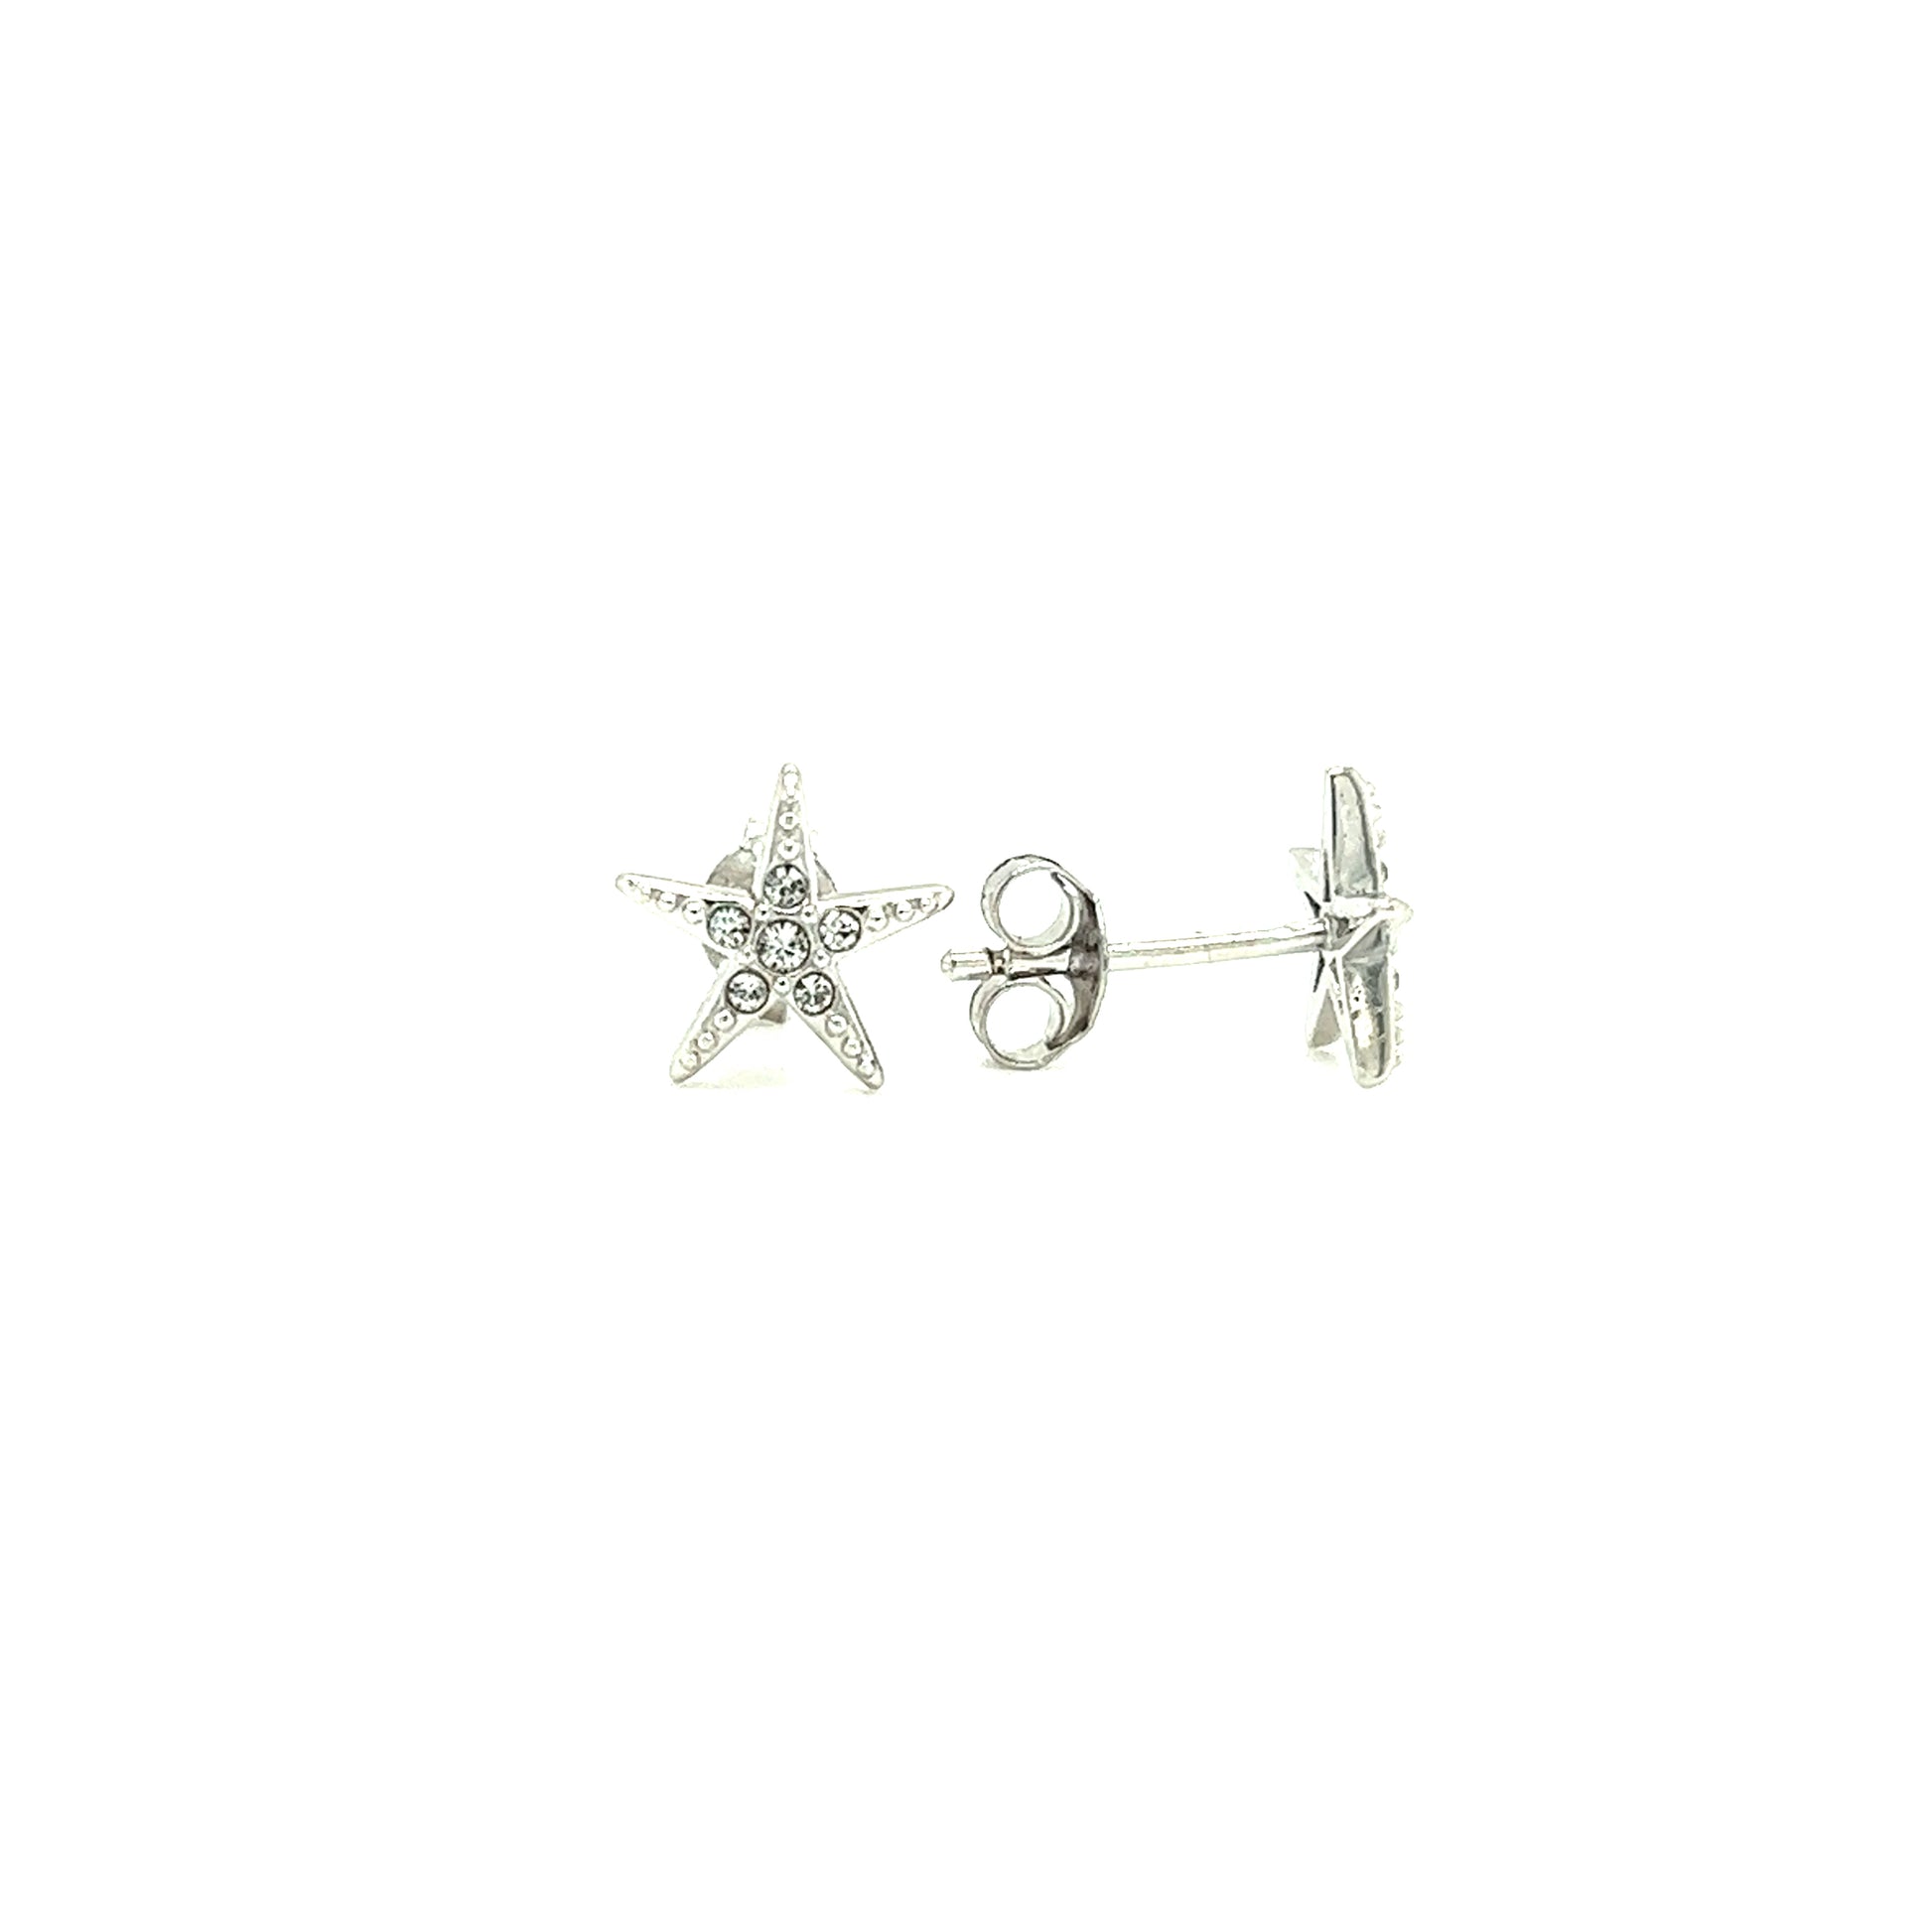 Starfish Stud Earrings with White Crystals in Sterling Silver Front and Side View